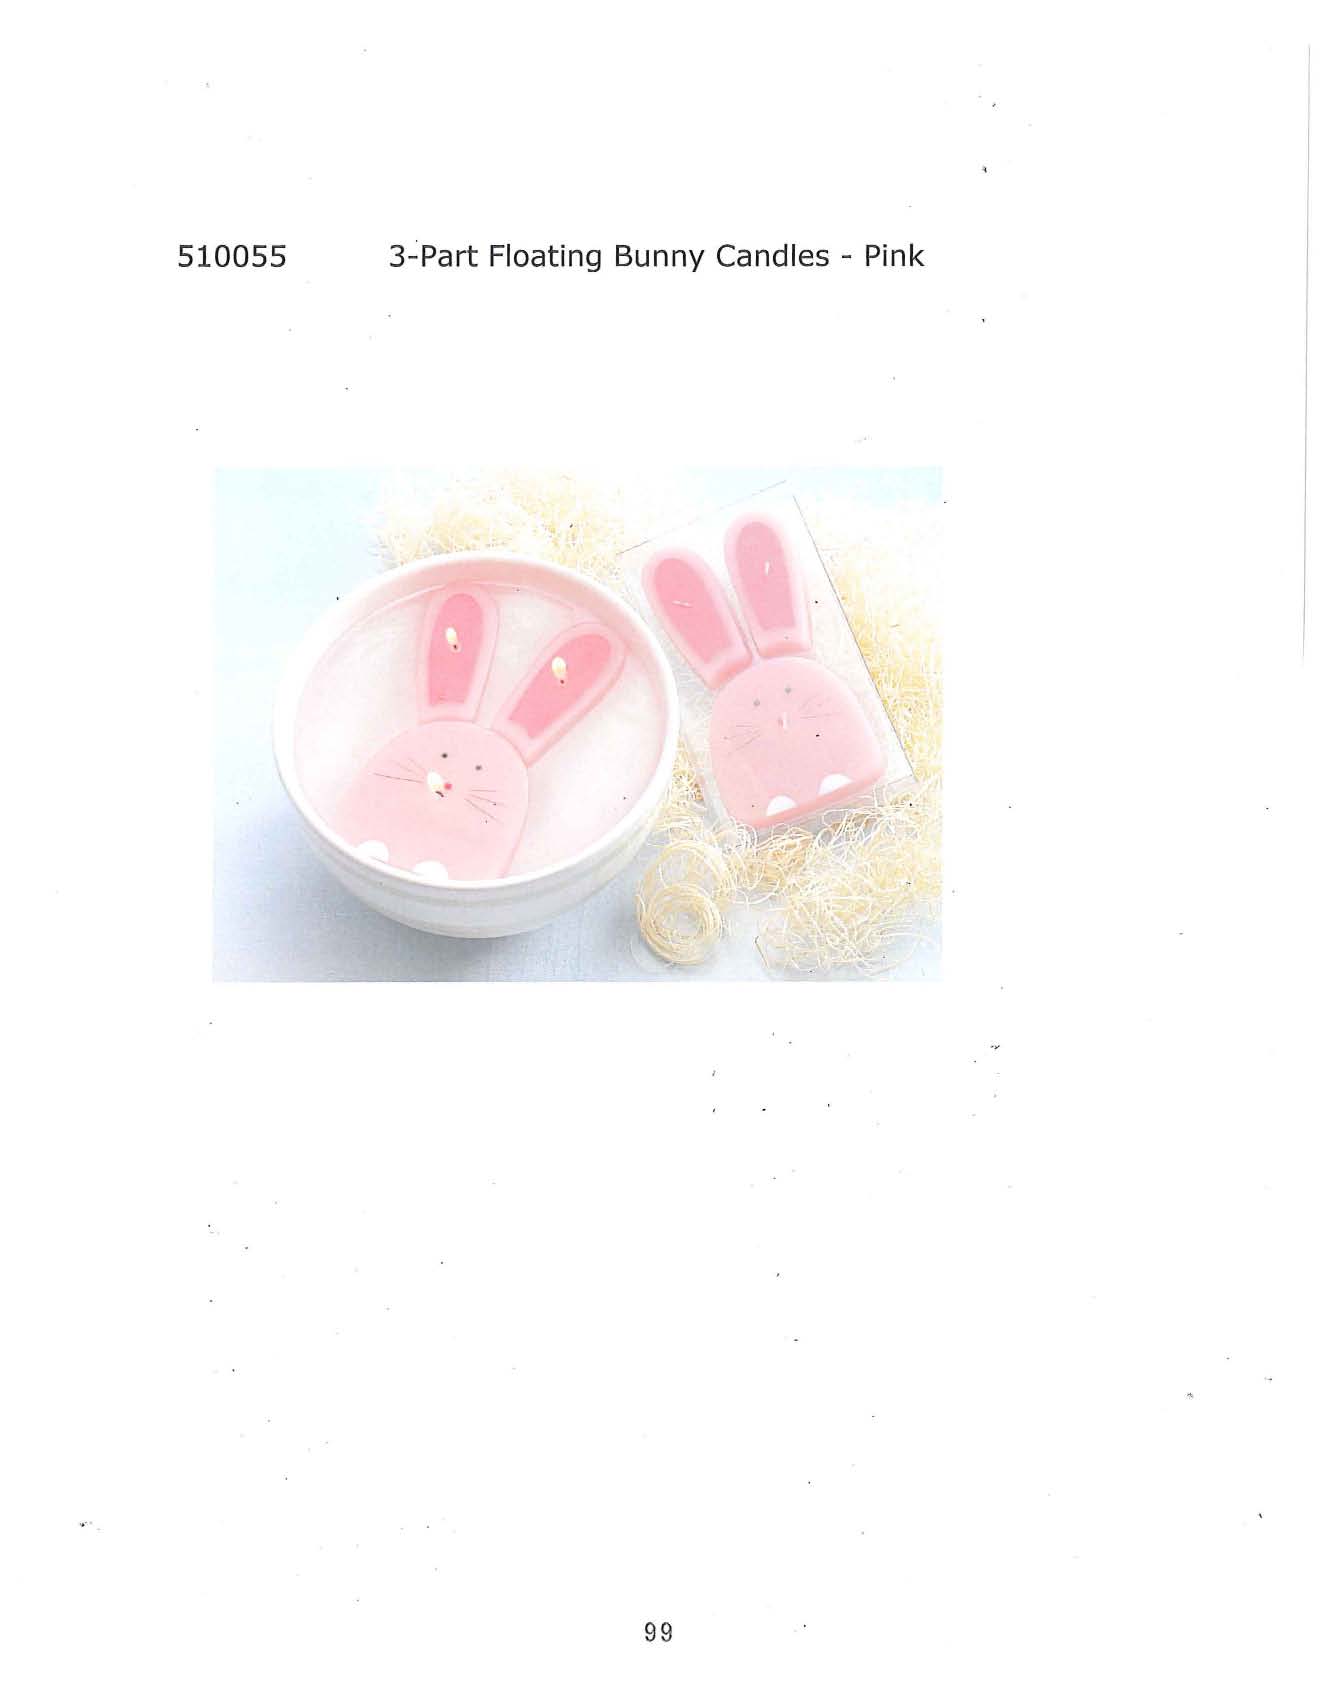 3-Part Floating Bunny Candle - Pink